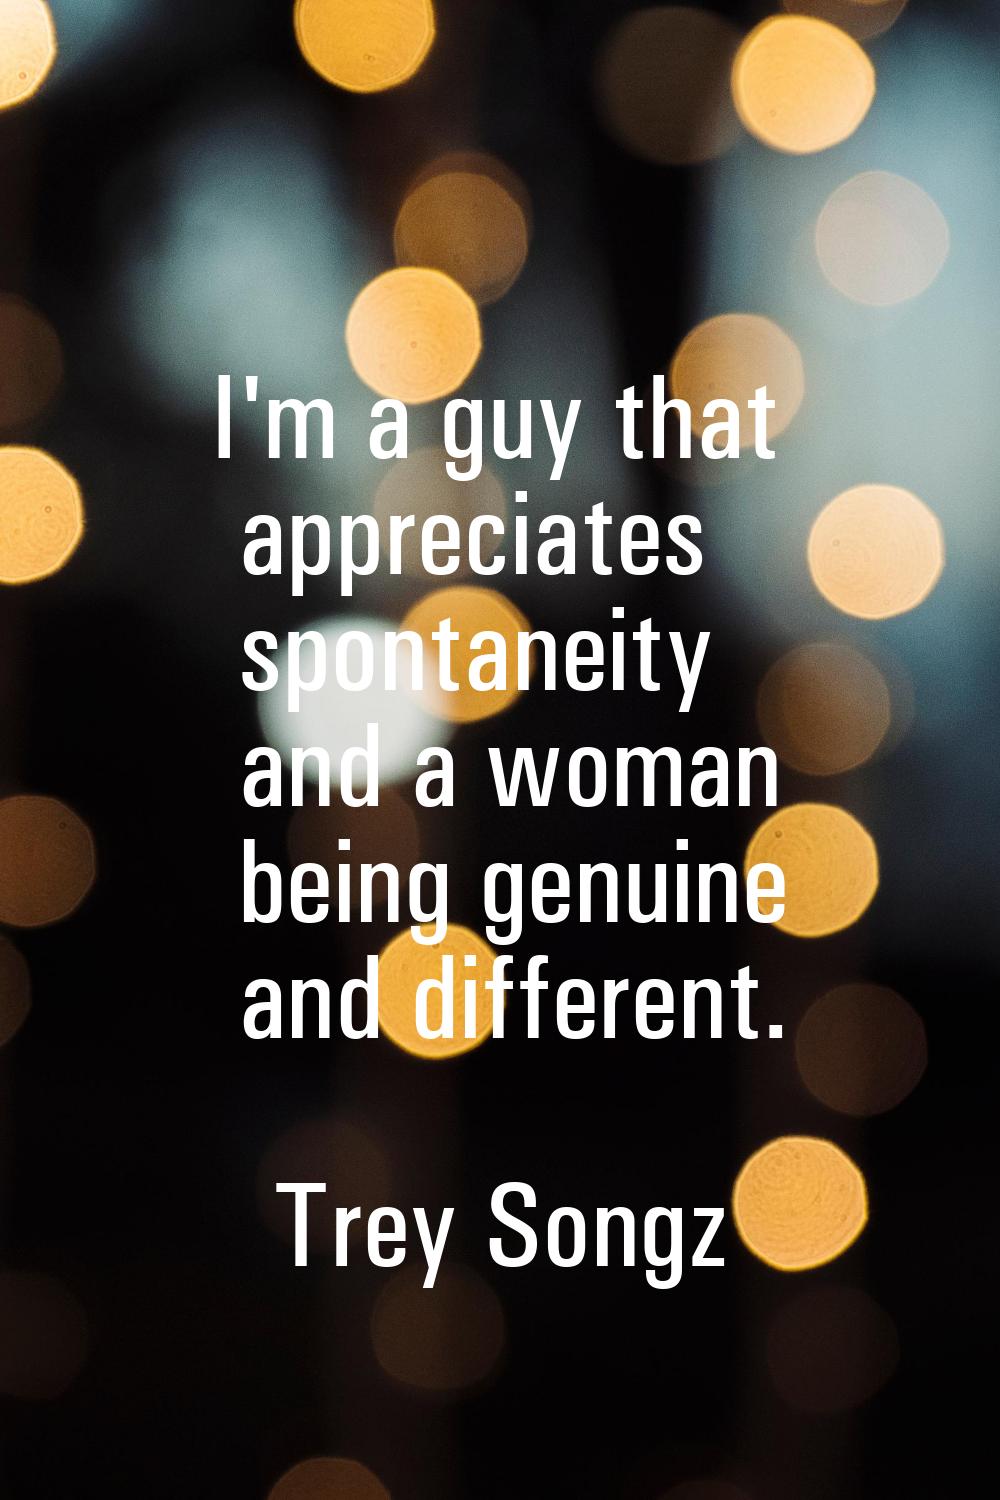 I'm a guy that appreciates spontaneity and a woman being genuine and different.